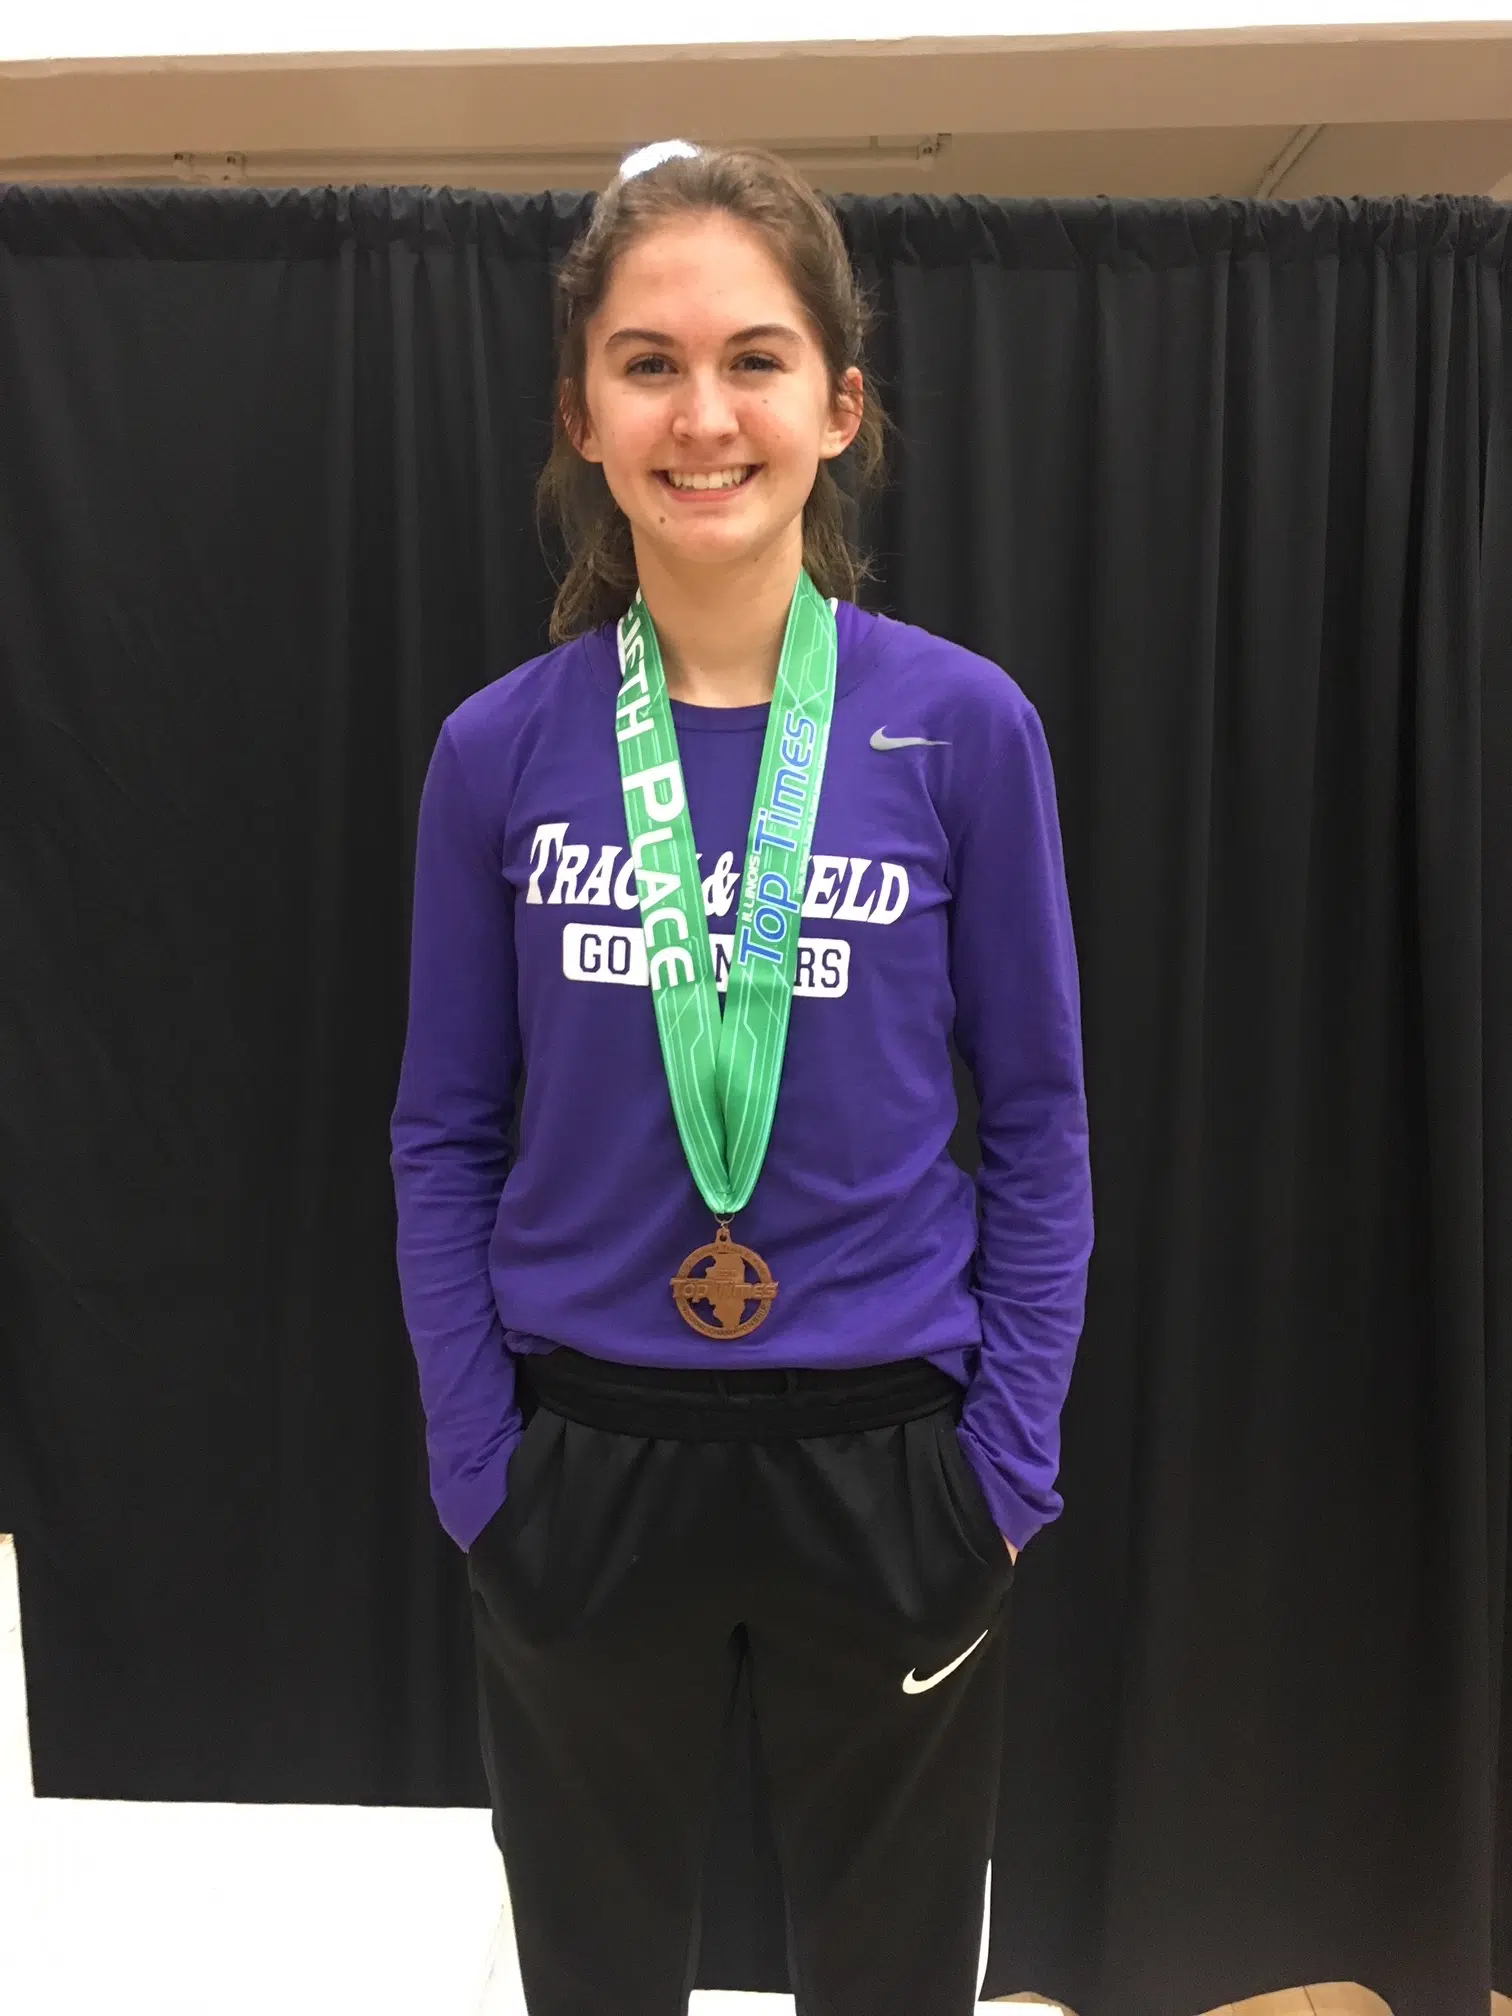 BSE's Claire Wilhour competes at Illinois Top Times Event, sets one new school record 